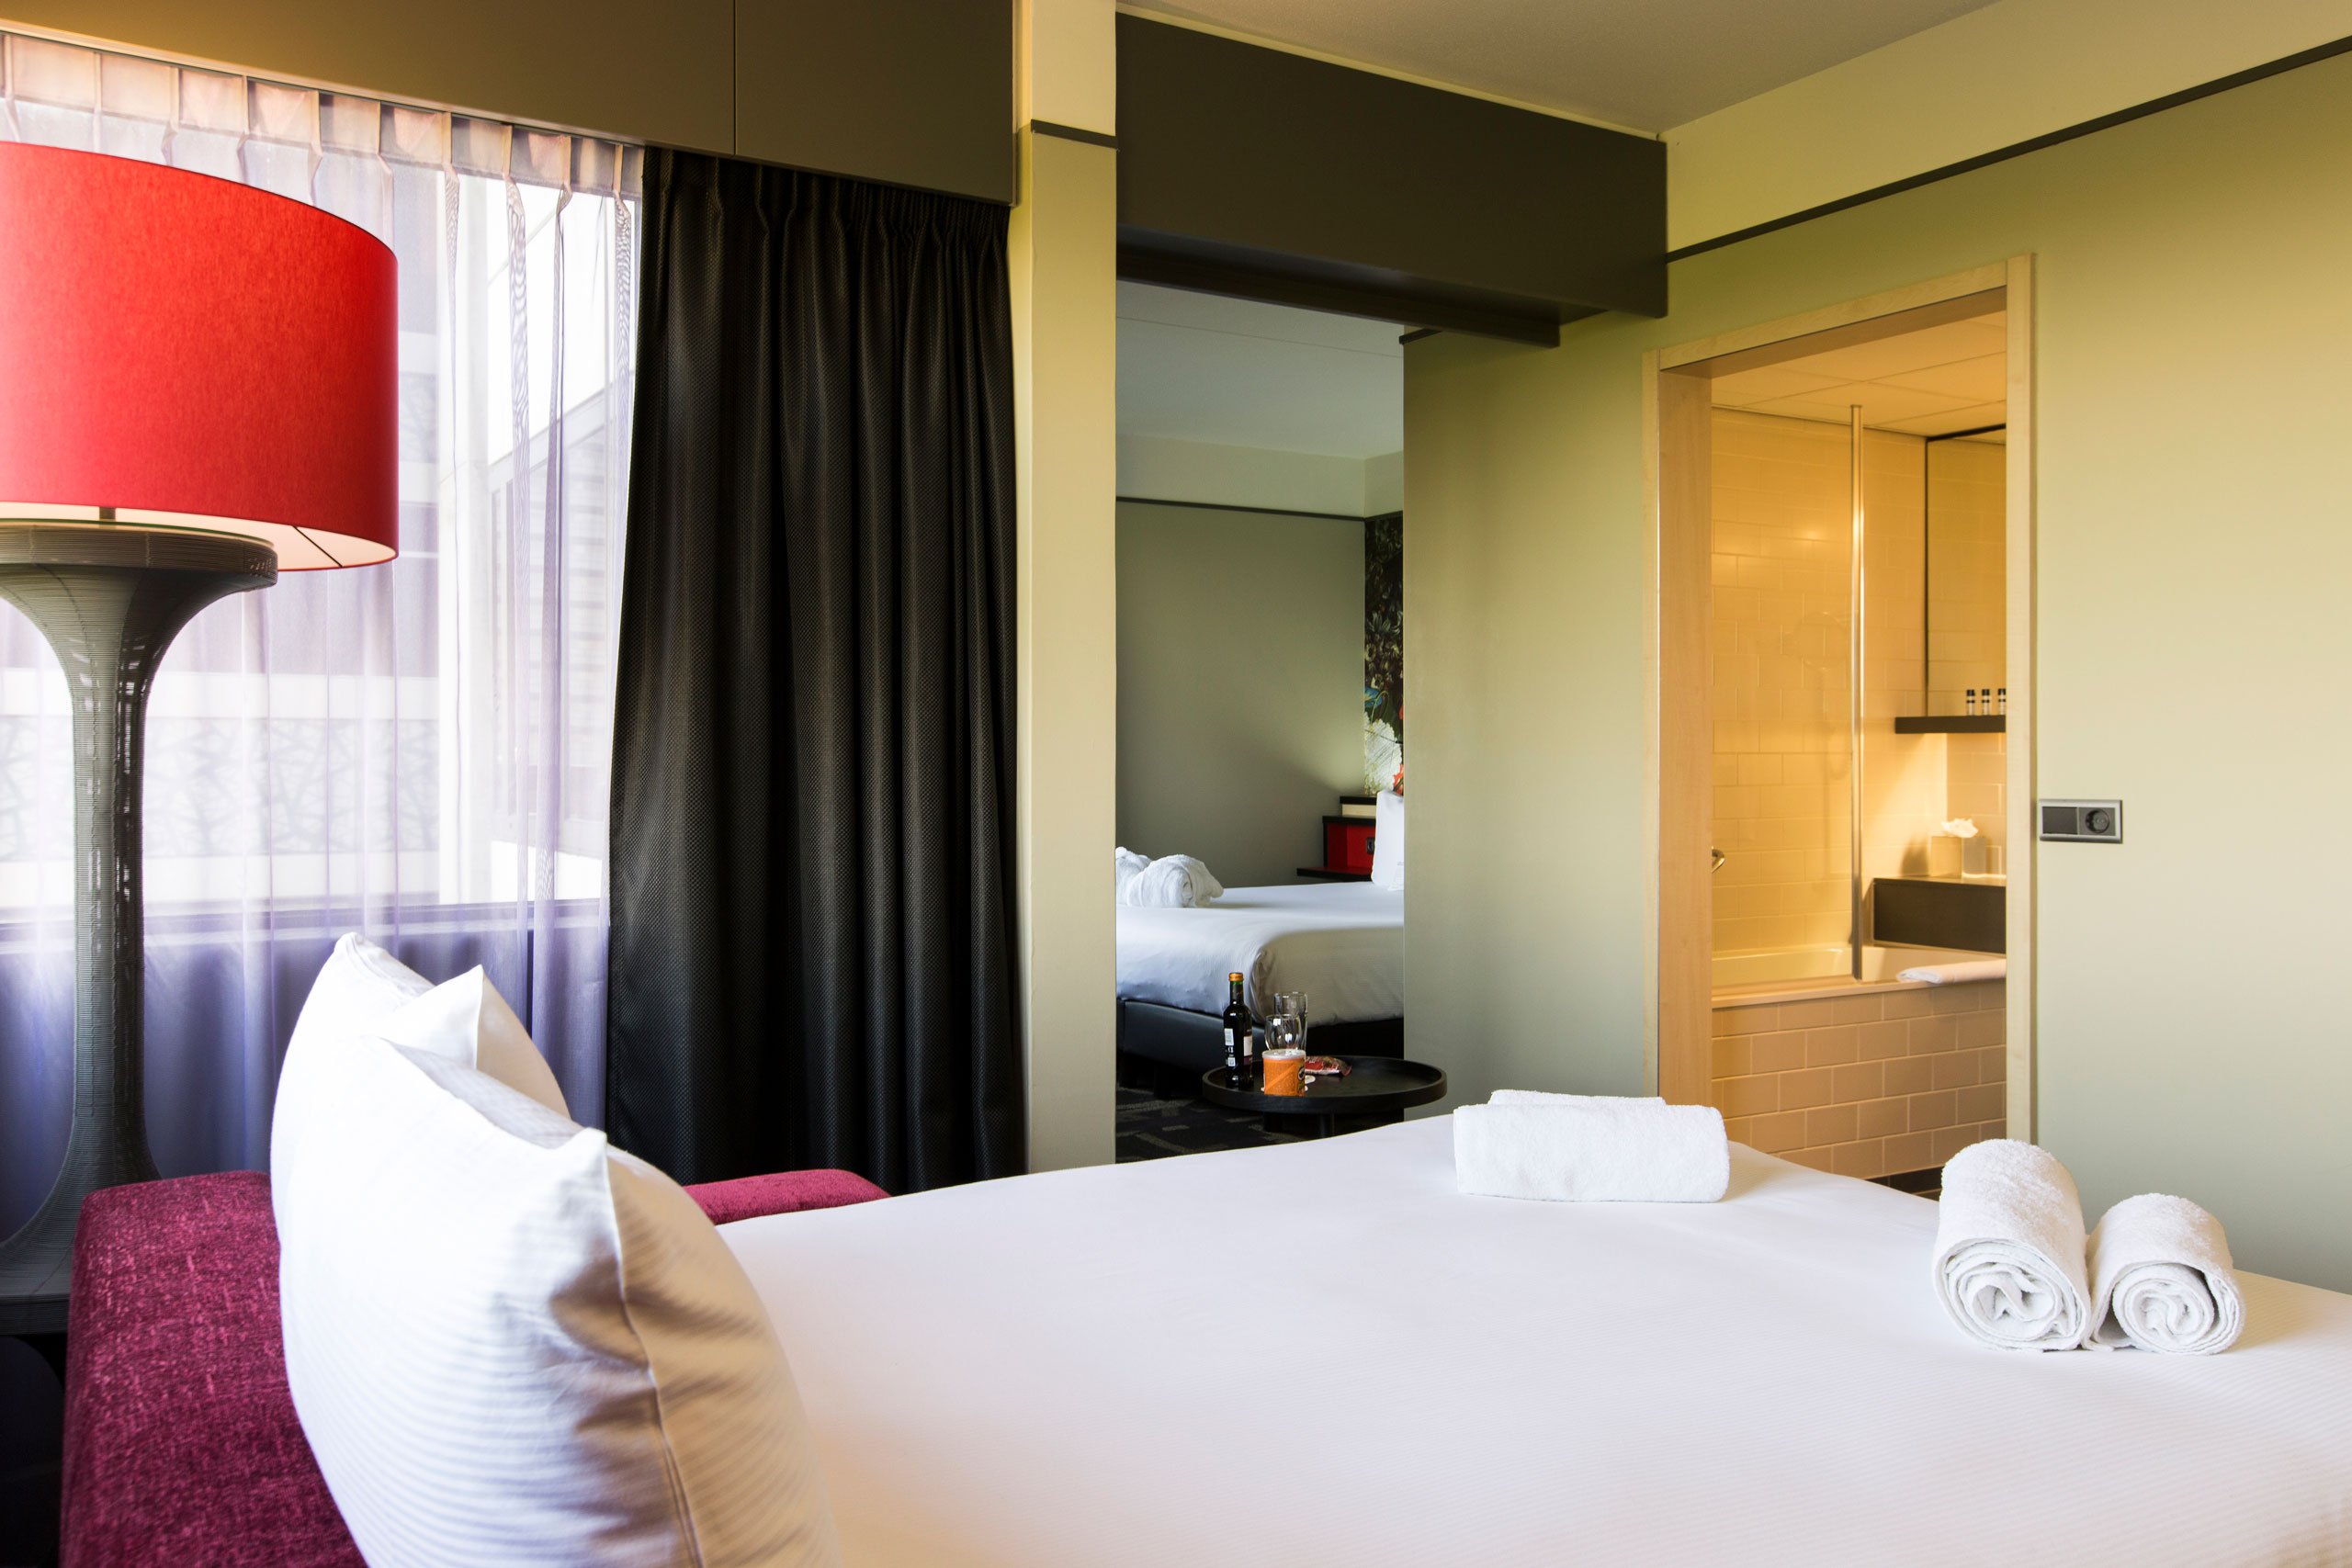 Stay In The Junior Suite Family Room, Twin Vs Full Size Bed Dimensions In Feet Munich